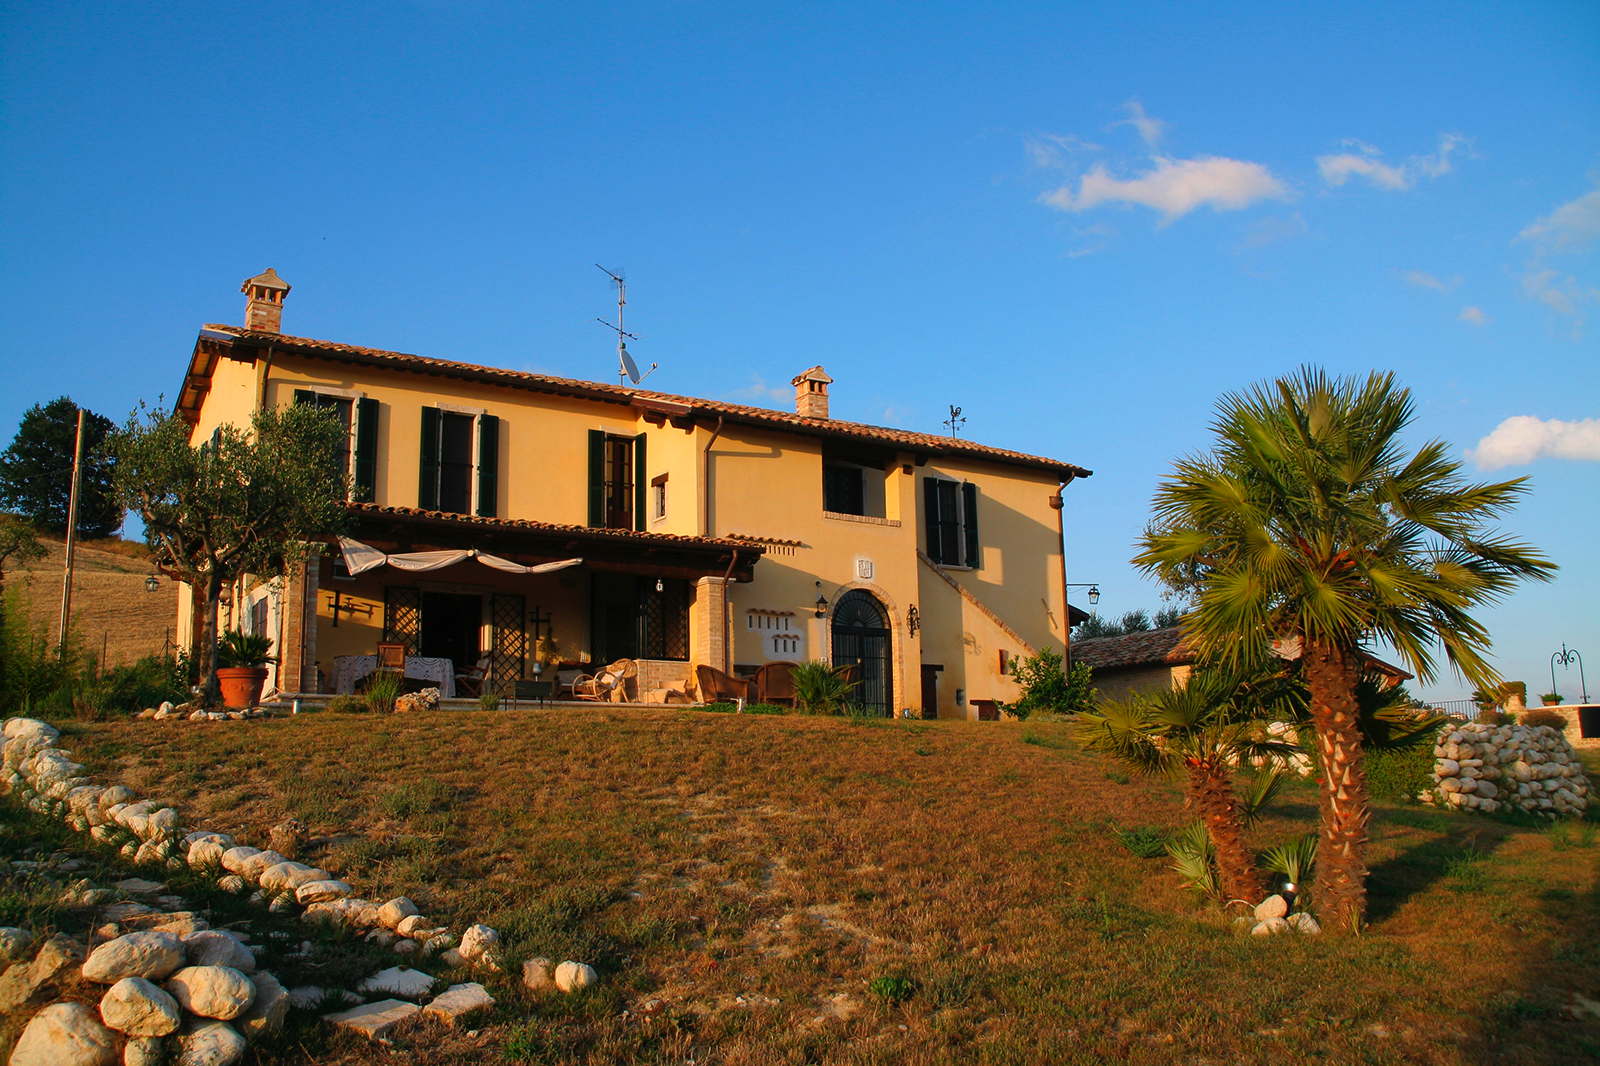 Villa for holiday rental with pool close to beach Marche Italy 